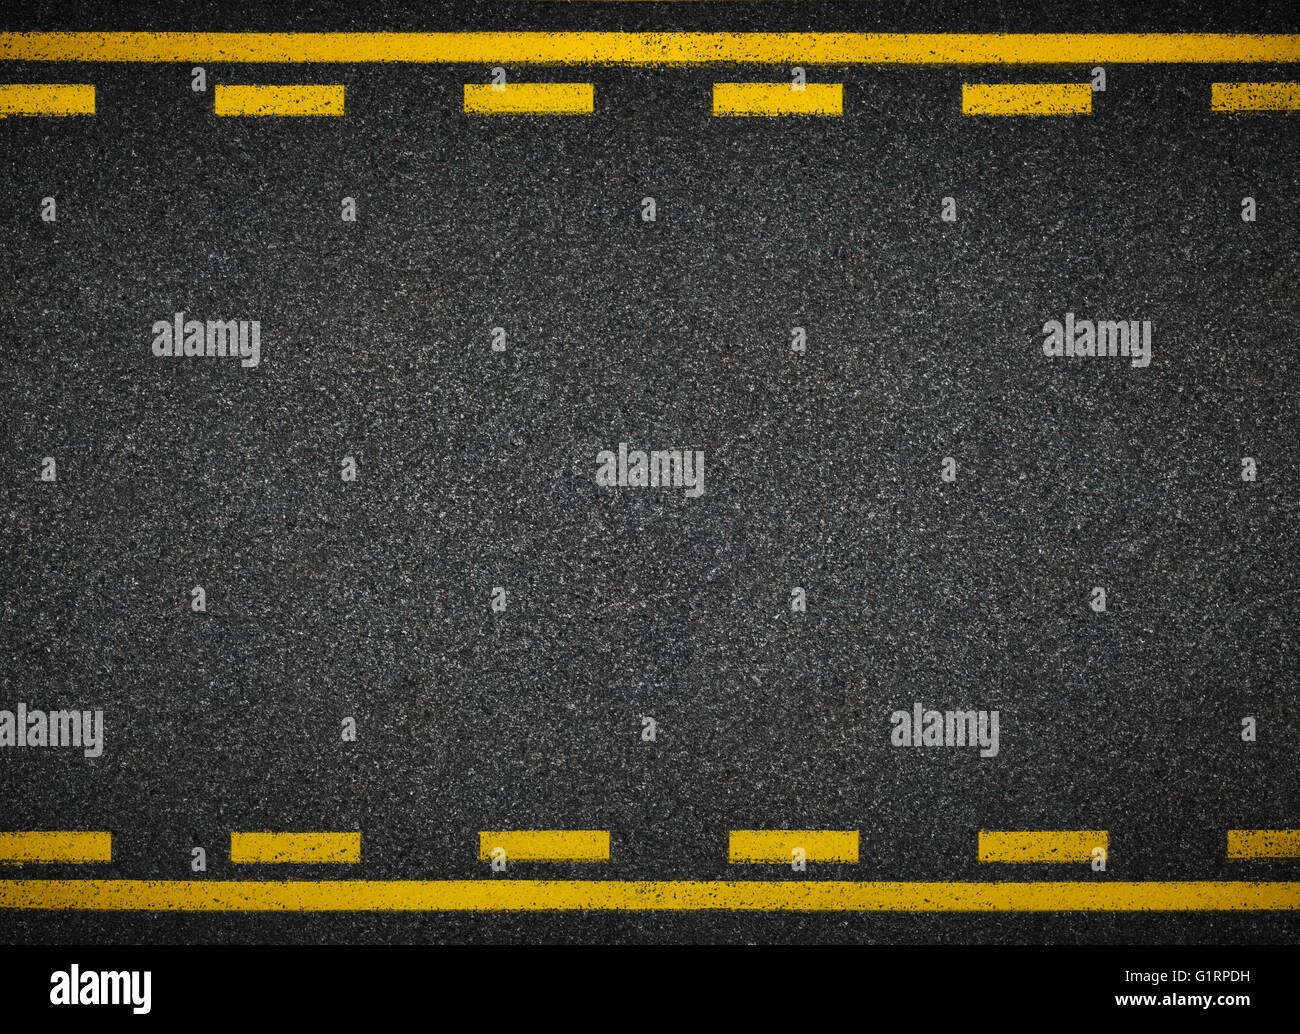 Road top view. Asphalt highway yellow line marks. Stock Photo